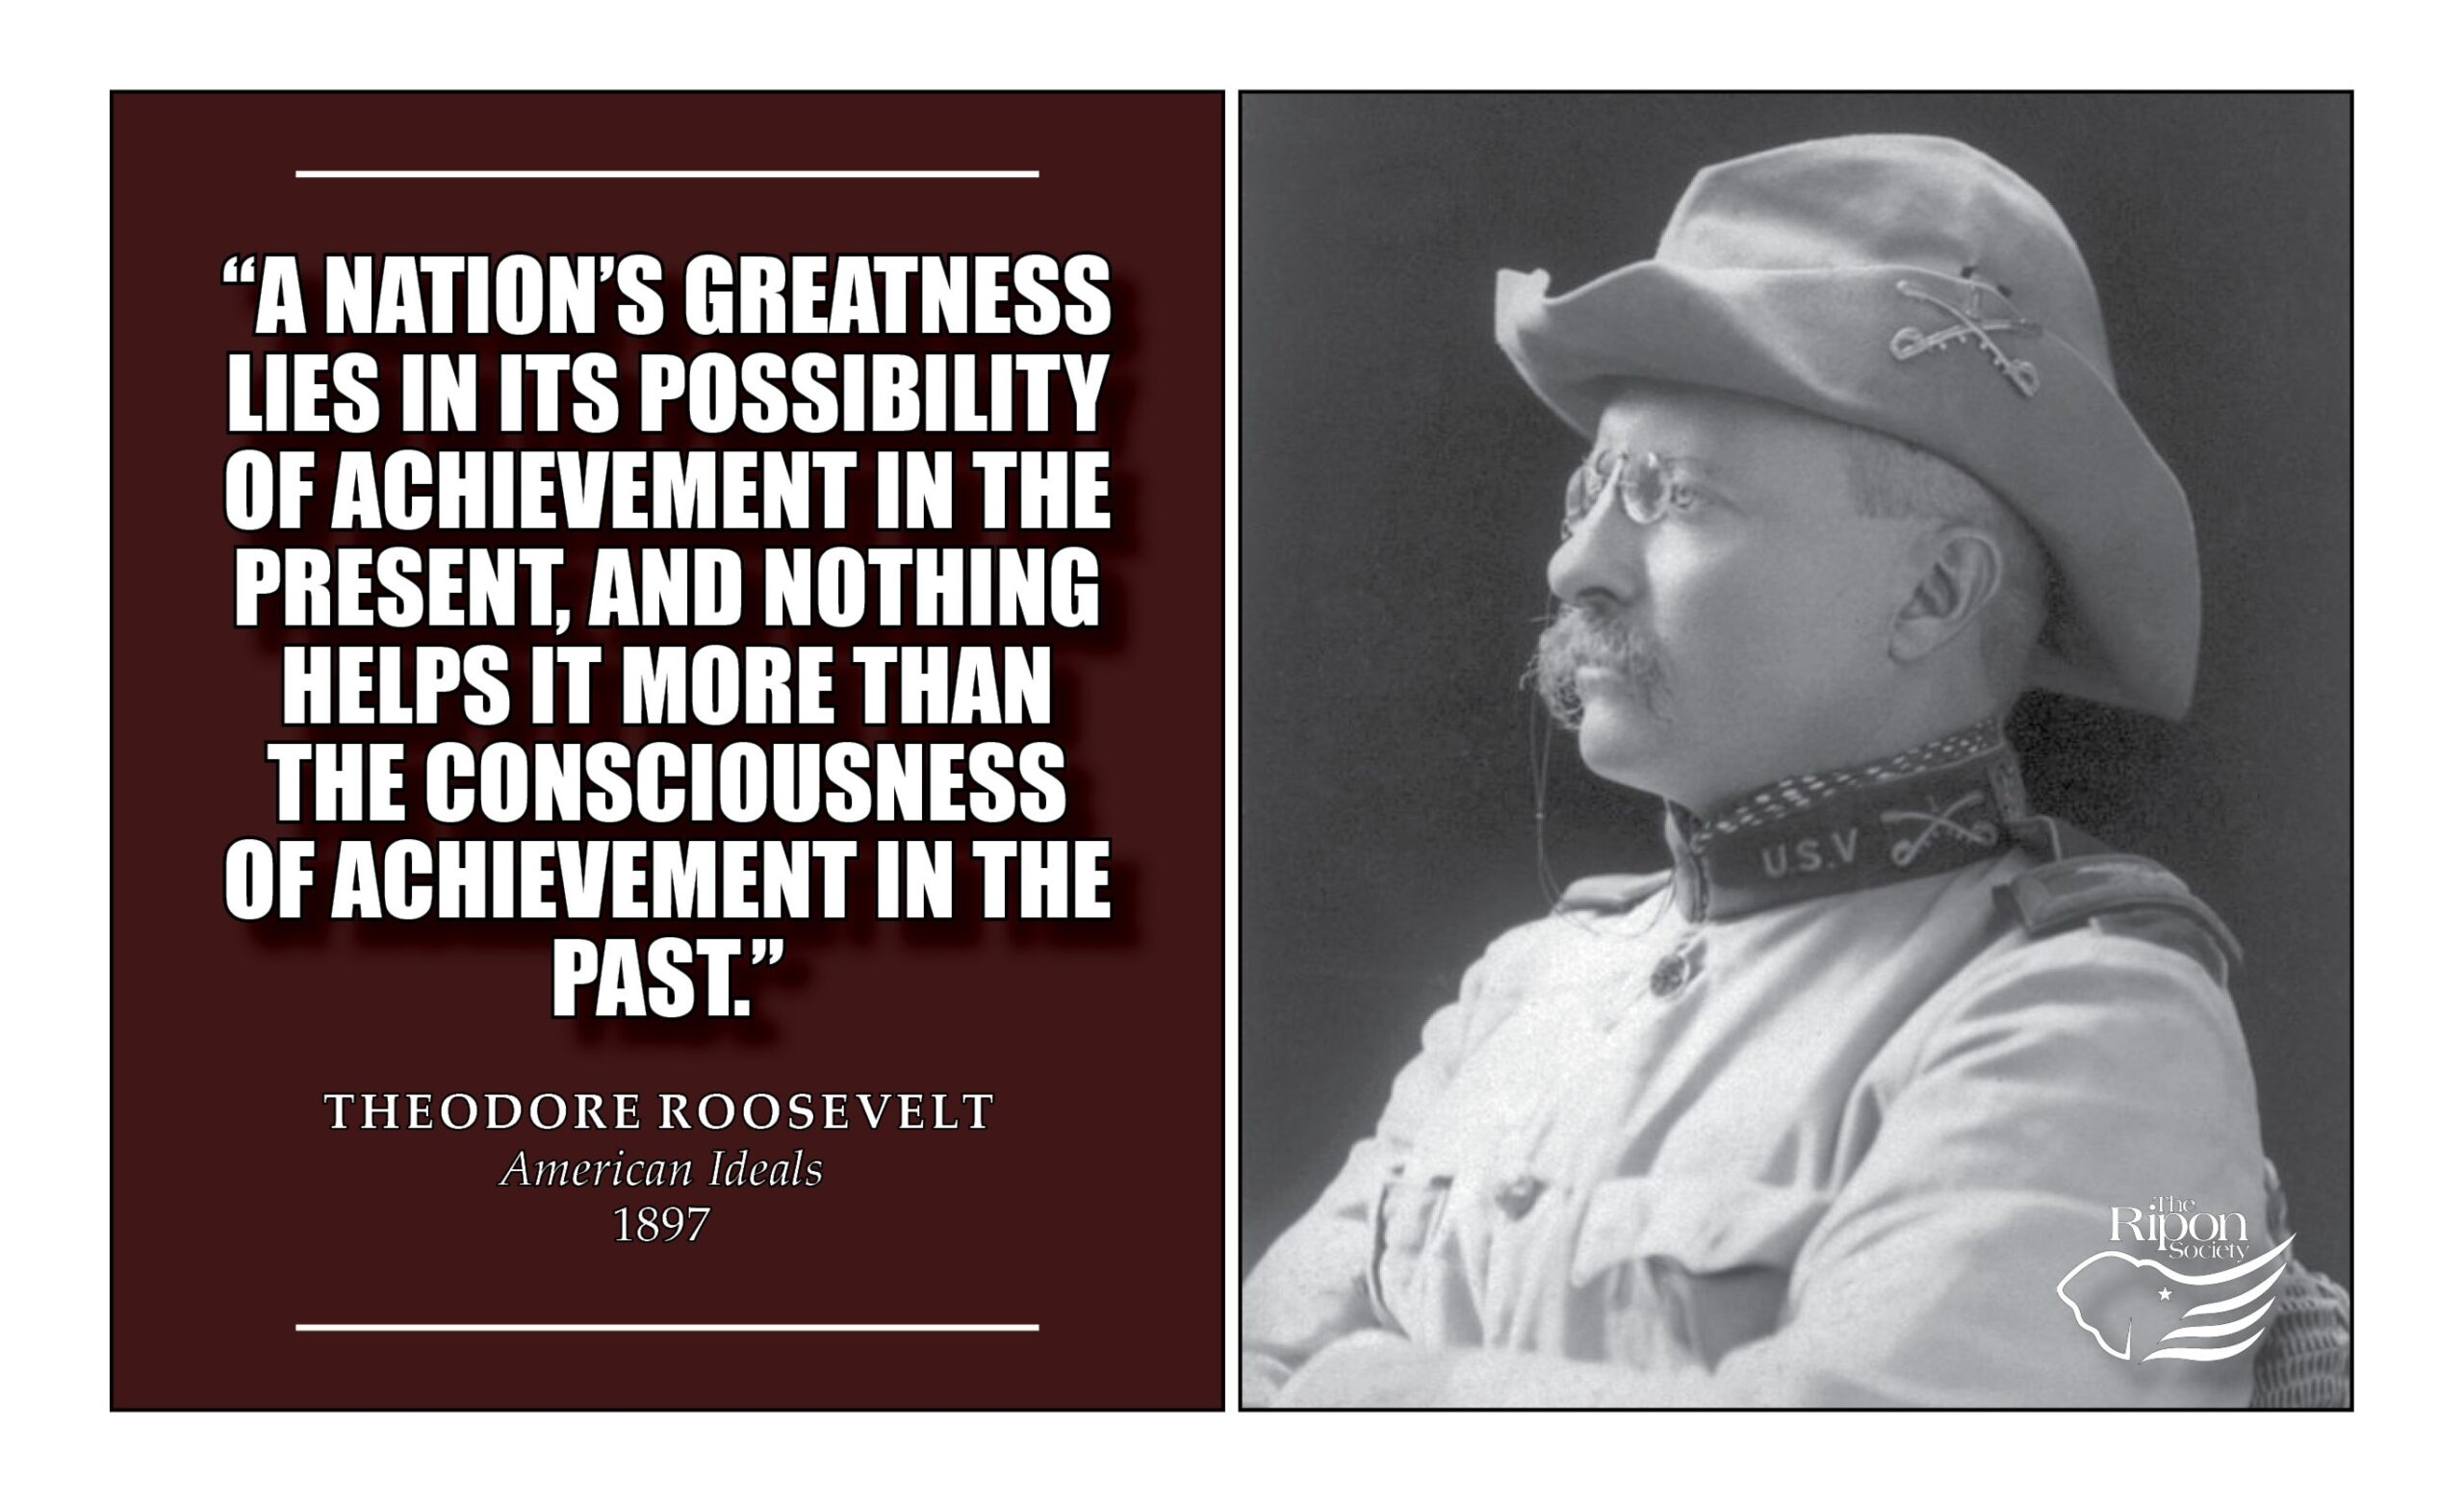 "A nation's greatness lies in its possibility of achievement in the present, and nothing helps it more than the consciousness of achievement in the past."